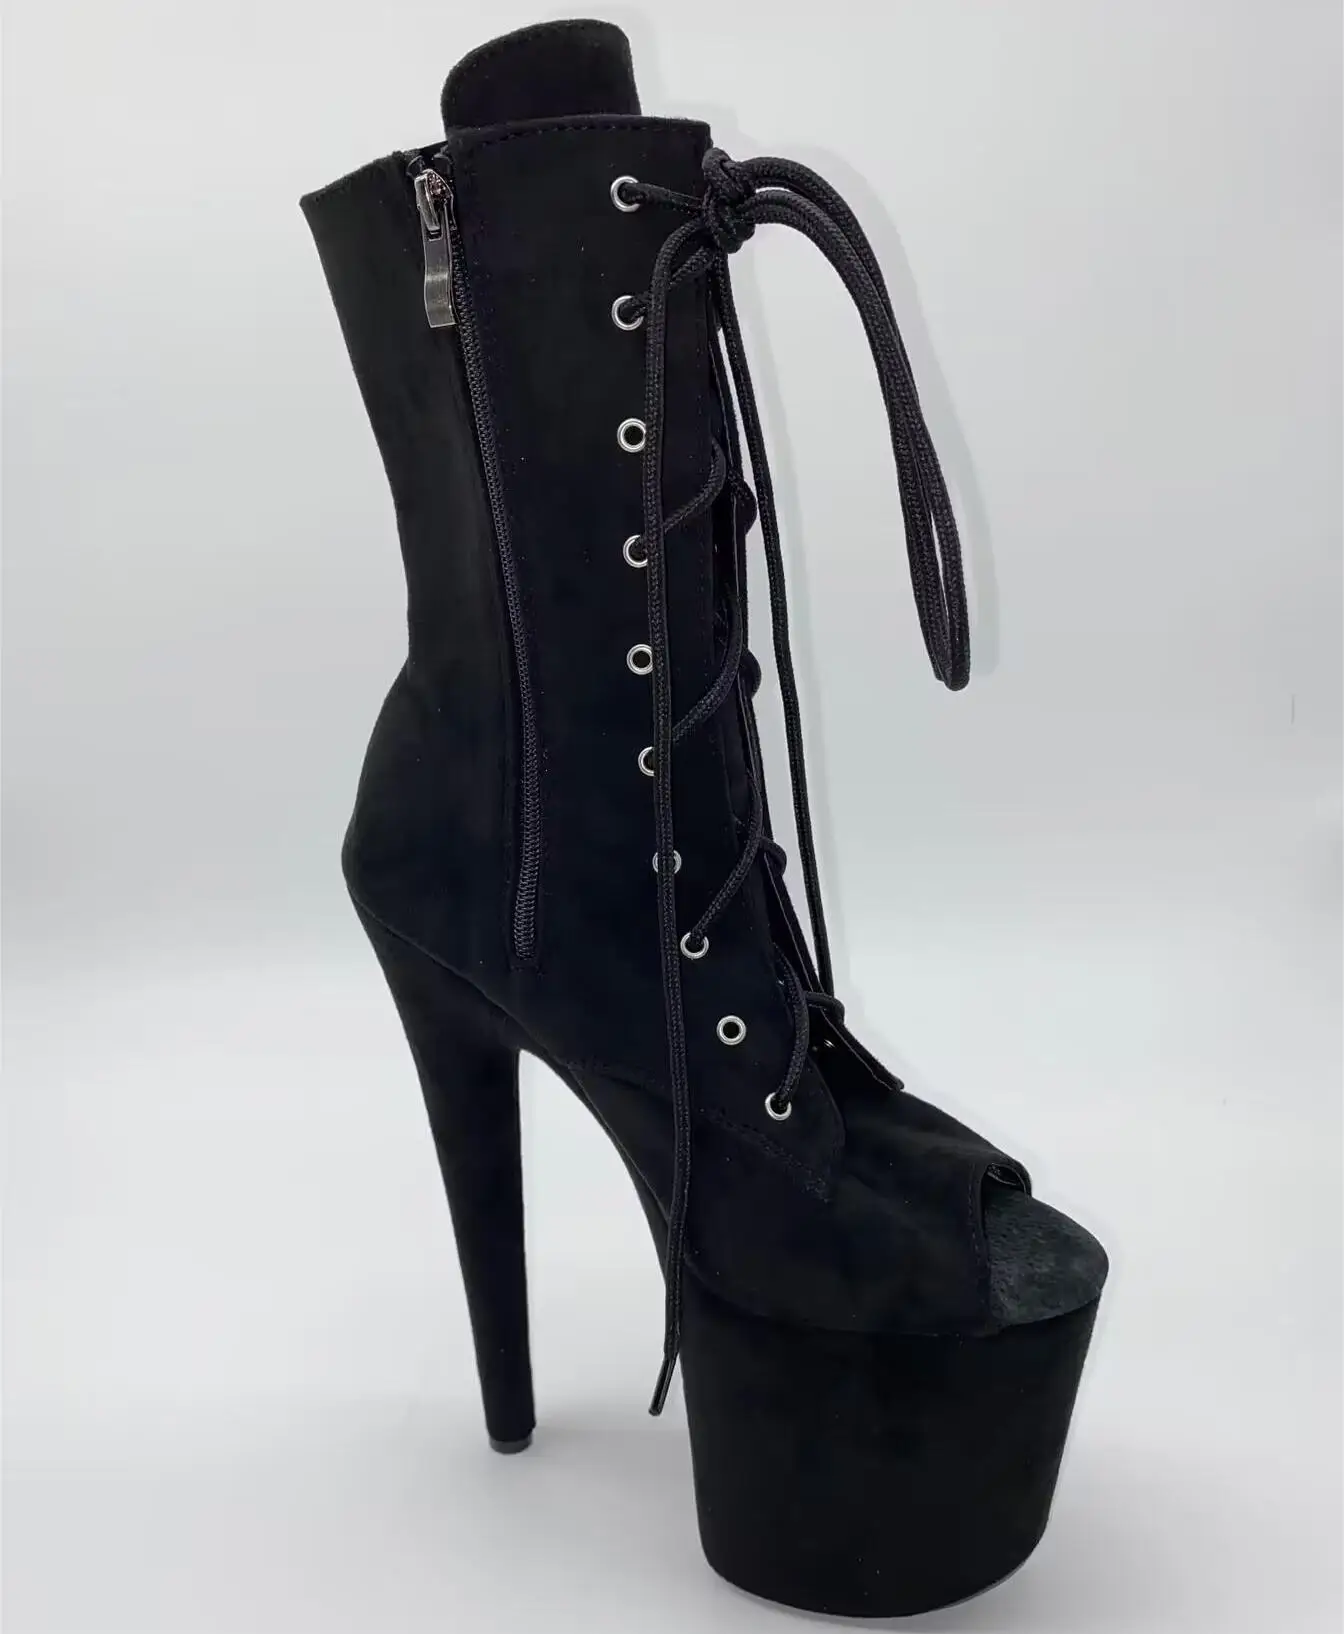 

Bag heel suede 20 cm shoes, 8 inch model stiletto heels, fish mouth zipper openings, nightclub pole dancing ankle boots